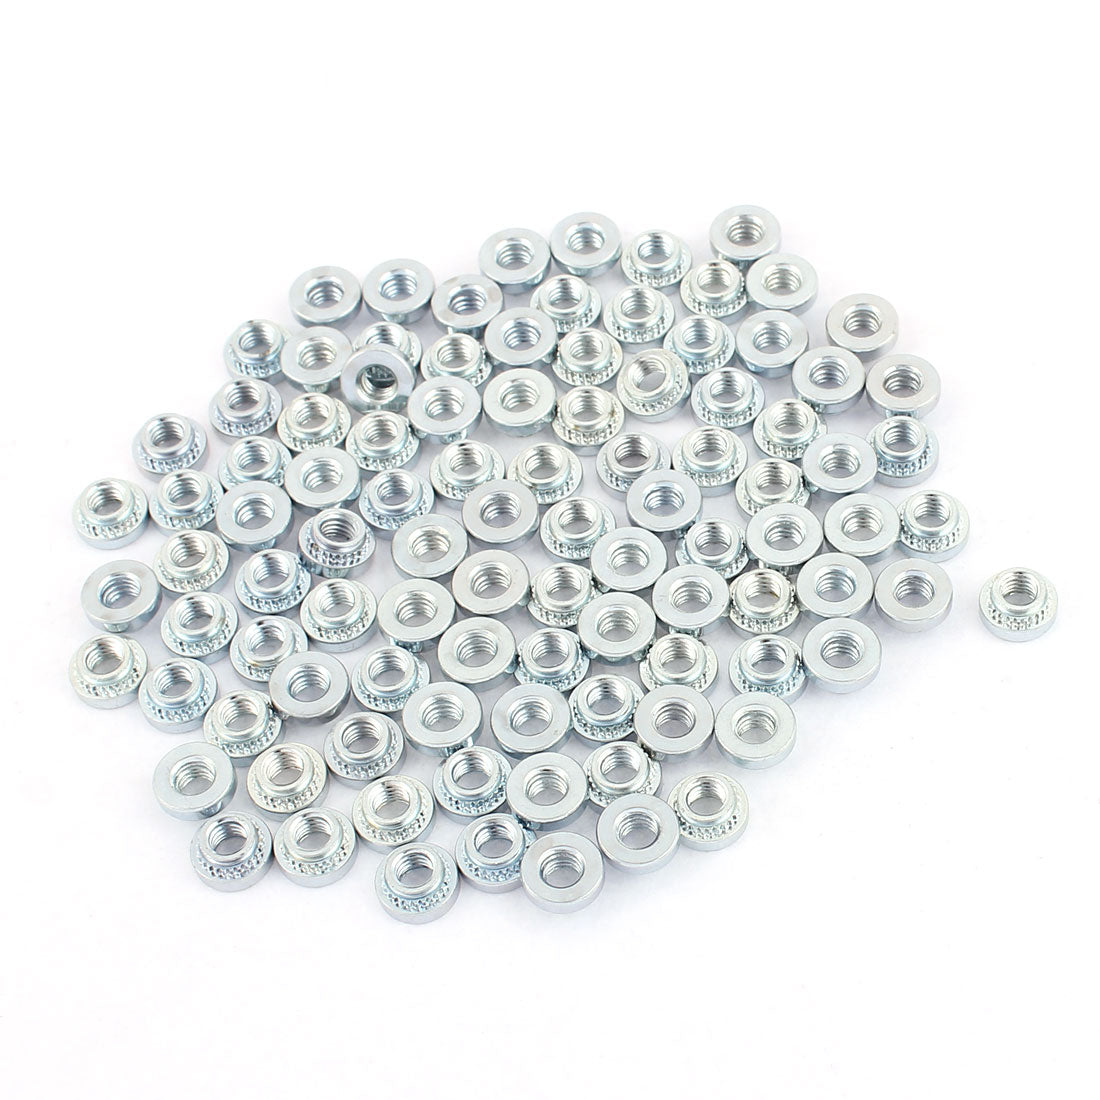 uxcell Uxcell M4-3 Knurled Metal Self Clinching Nut Fastener 100pcs for 2mm Thick Thin Plate